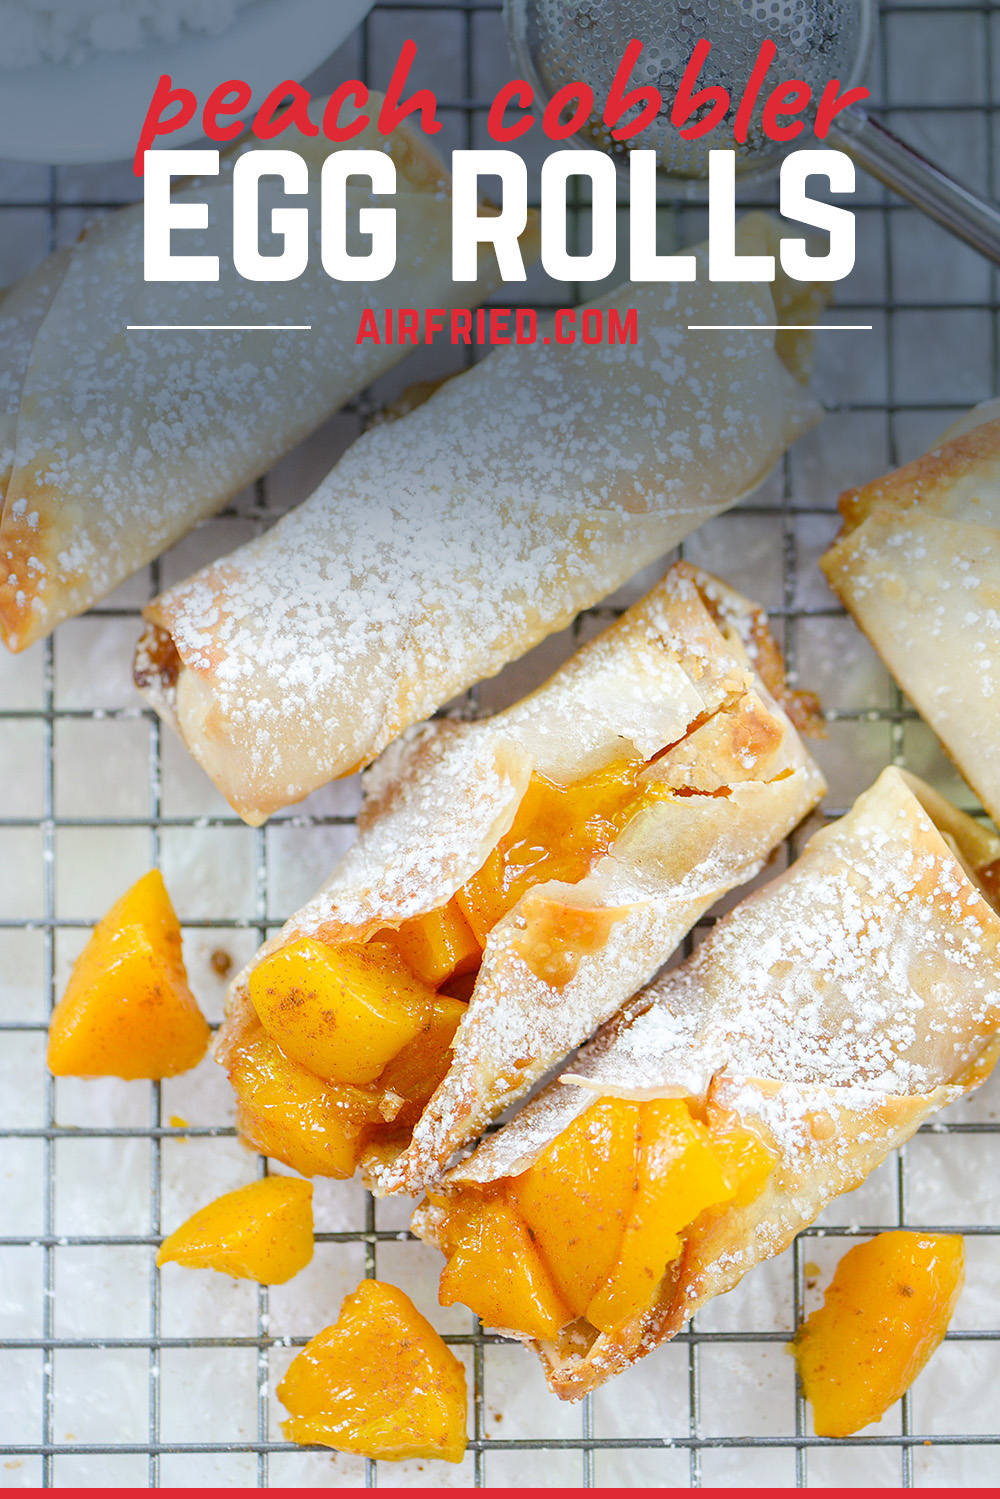 These egg rolls are filled with a sweet peach cobbler filling!